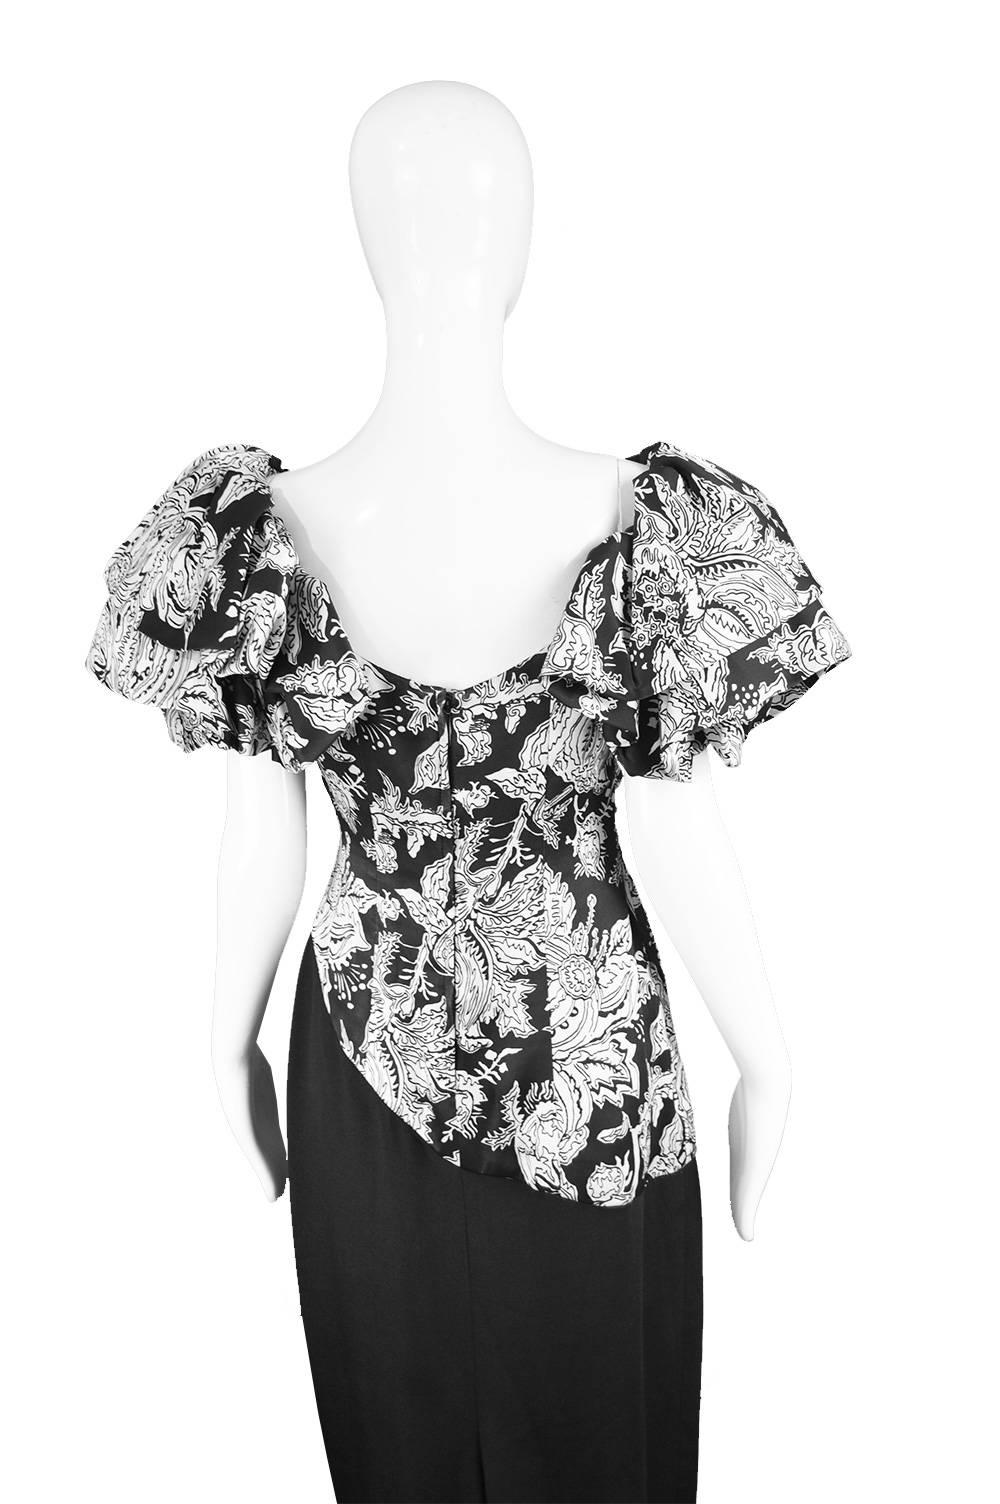 Mignon Vintage Black & White Floral Tiered Ruffle Sleeve Evening Gown, 1980s For Sale 3